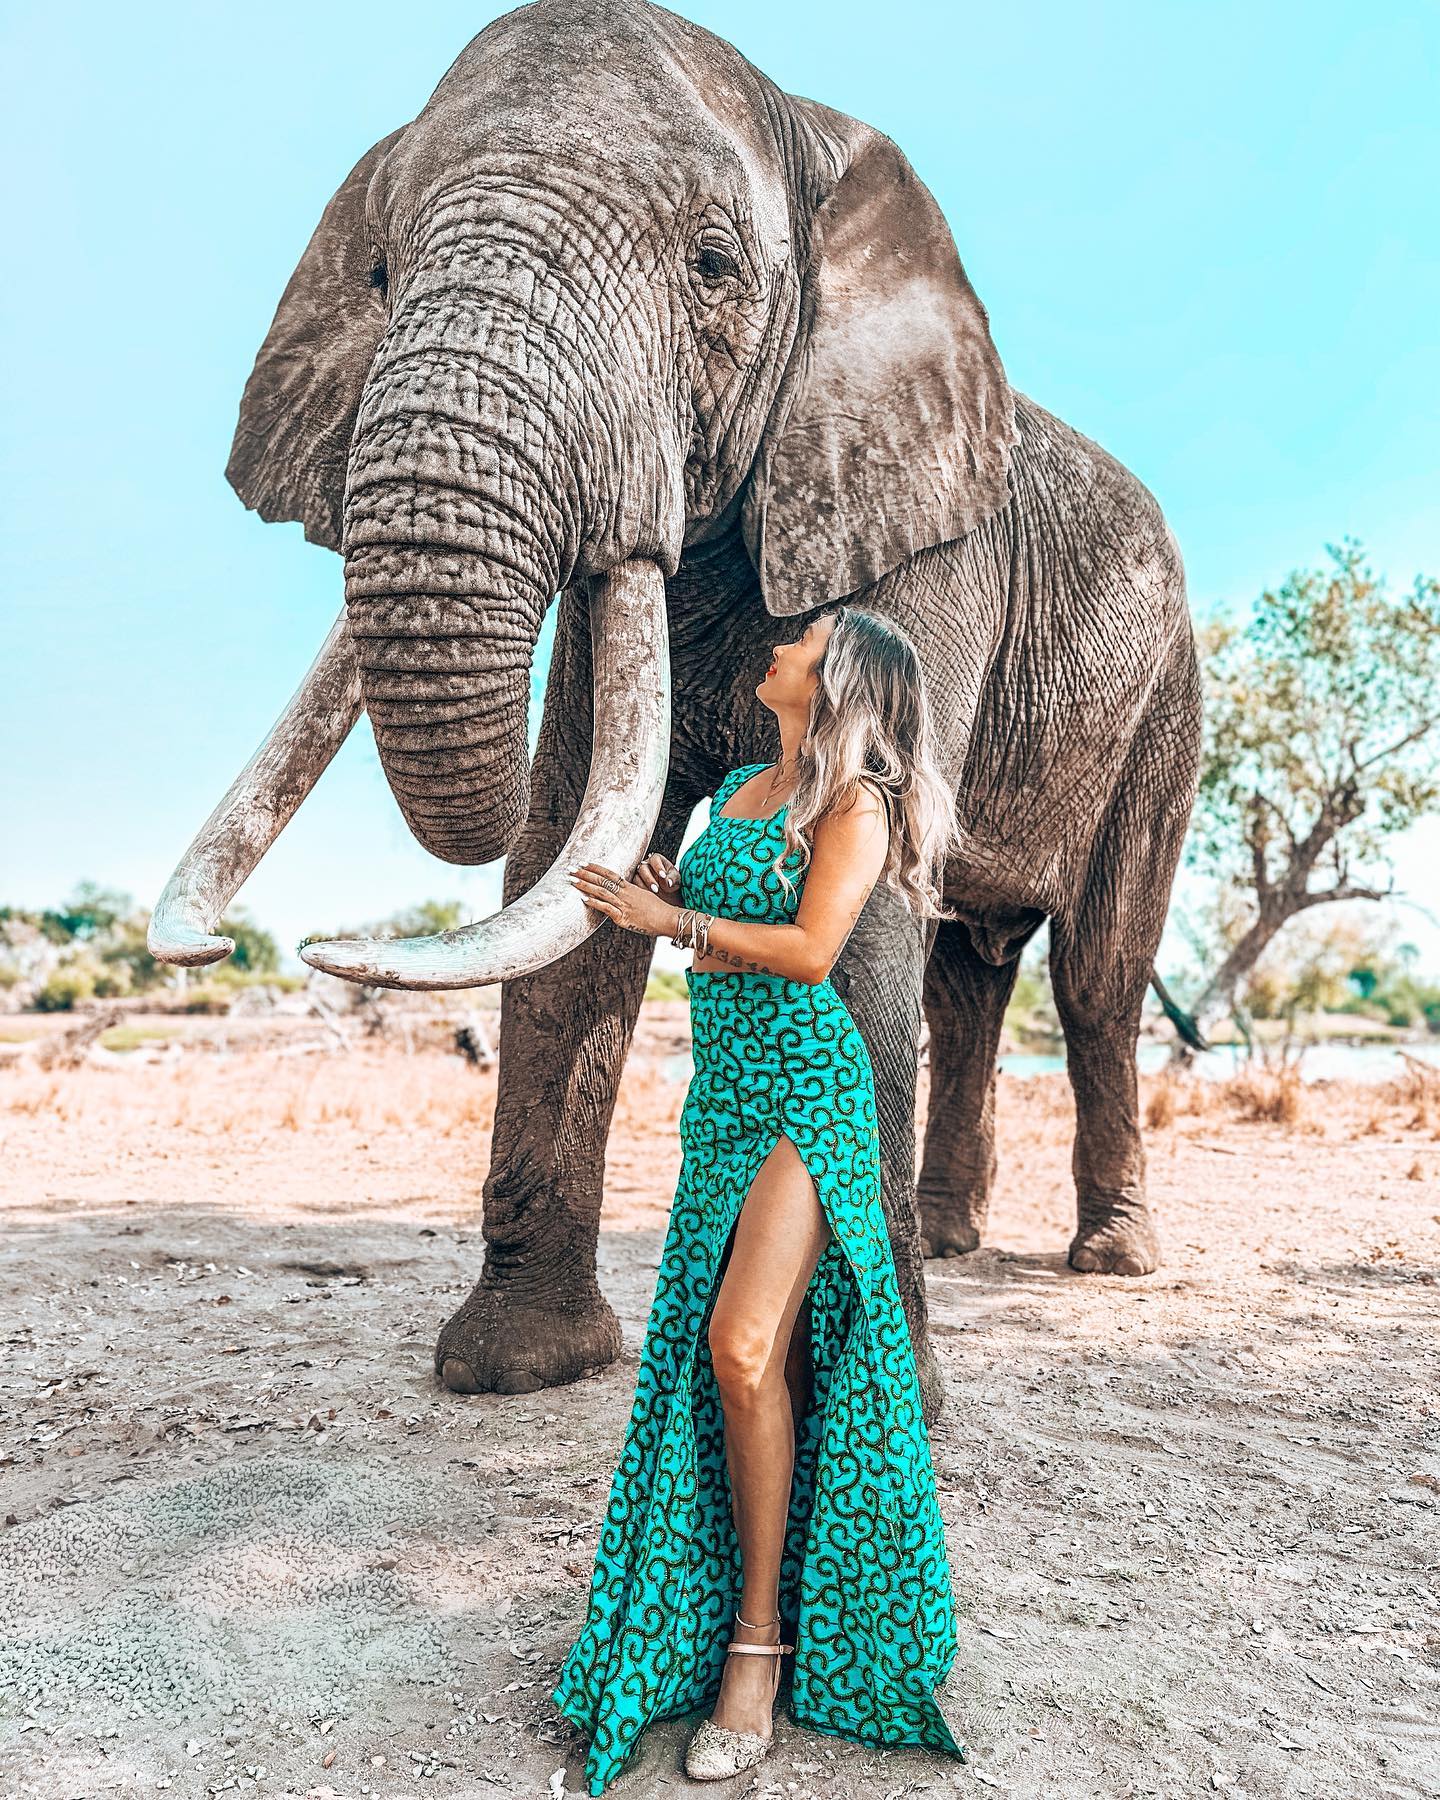 Finally getting a chance to post after over a week! So starting out with an elephant rescue I went to 6 years ago that I am grateful to have brought my group to last week!

This is at @theelephantcafezambia — one of the few places I have heard of that used to allow elephant riding, but stopped when they saw that many people were against it on social media. Instead, they opened a beautiful lunch spot with incredible food, and they use that to profit (both for the humans and the elephants) instead of forcing the animals to be ridden.

The elephants are still free-roaming 正规极速赛车平台✪As well, but they will come up to the cafe area for “treats” which is how you can take photos with them. It’s still not total freedom but at least a step in the right direction.

Is meeting an elephant on your bucketlist? Which of these is getting put on my CasitAlyssa wall??

Moments from my recent @mylifesatraveltribe group trip in #zambia #zimbabwe #botswana #africa #mylifesatravelmovie